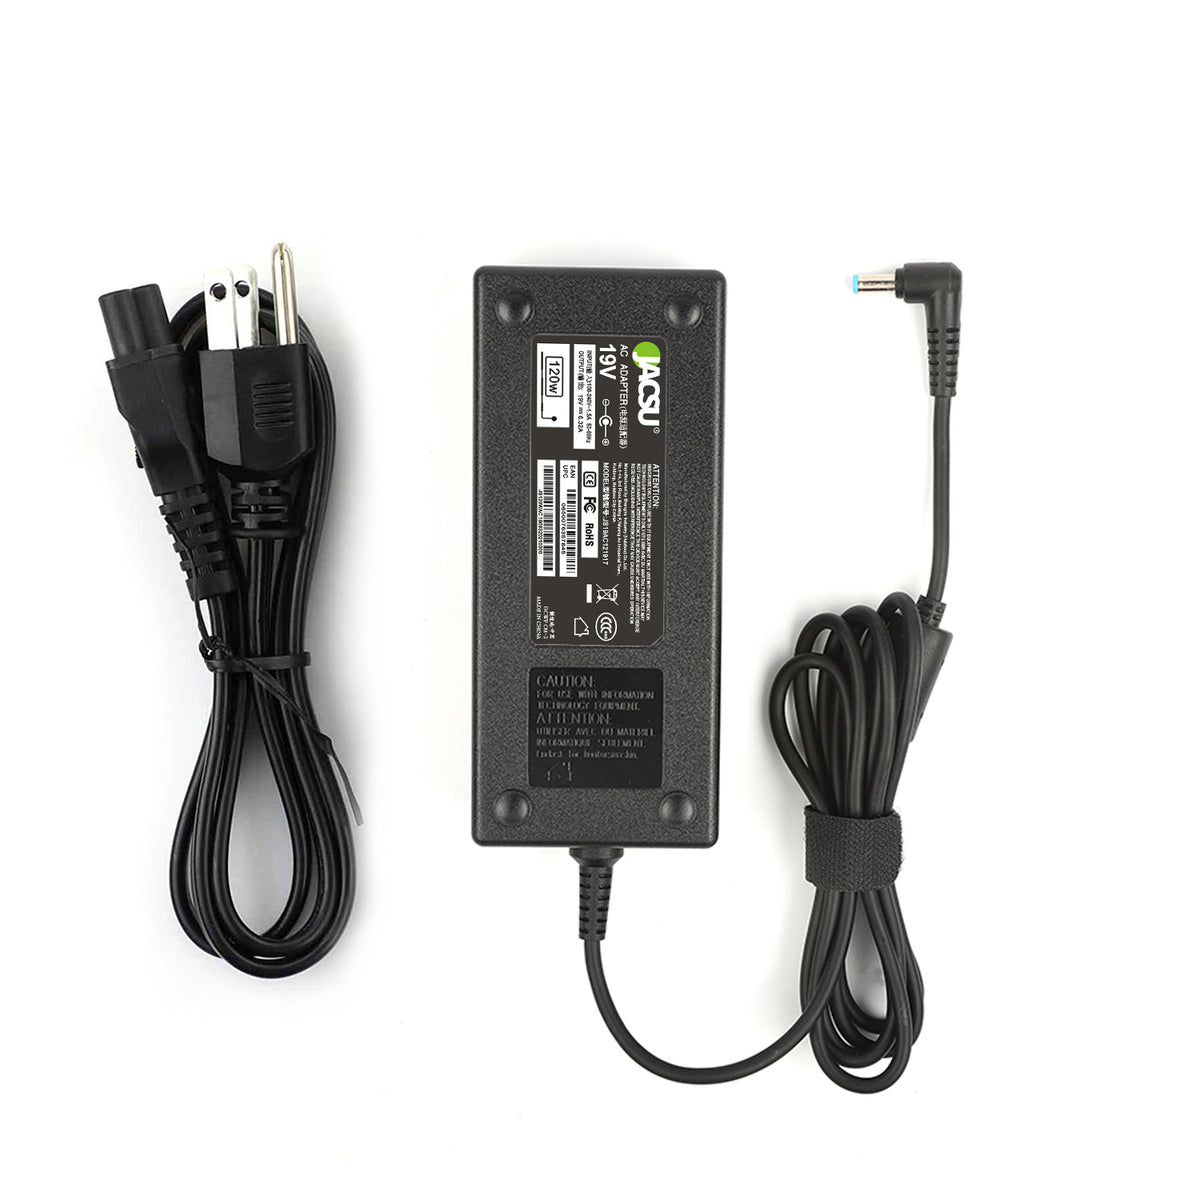 Jacsu 19V 6.32A 120W (5.5*1.7mm) AC Laptop Adapter Charger For Aspire 8951G AS8951G 5551 V3-771G-9809 Notebook